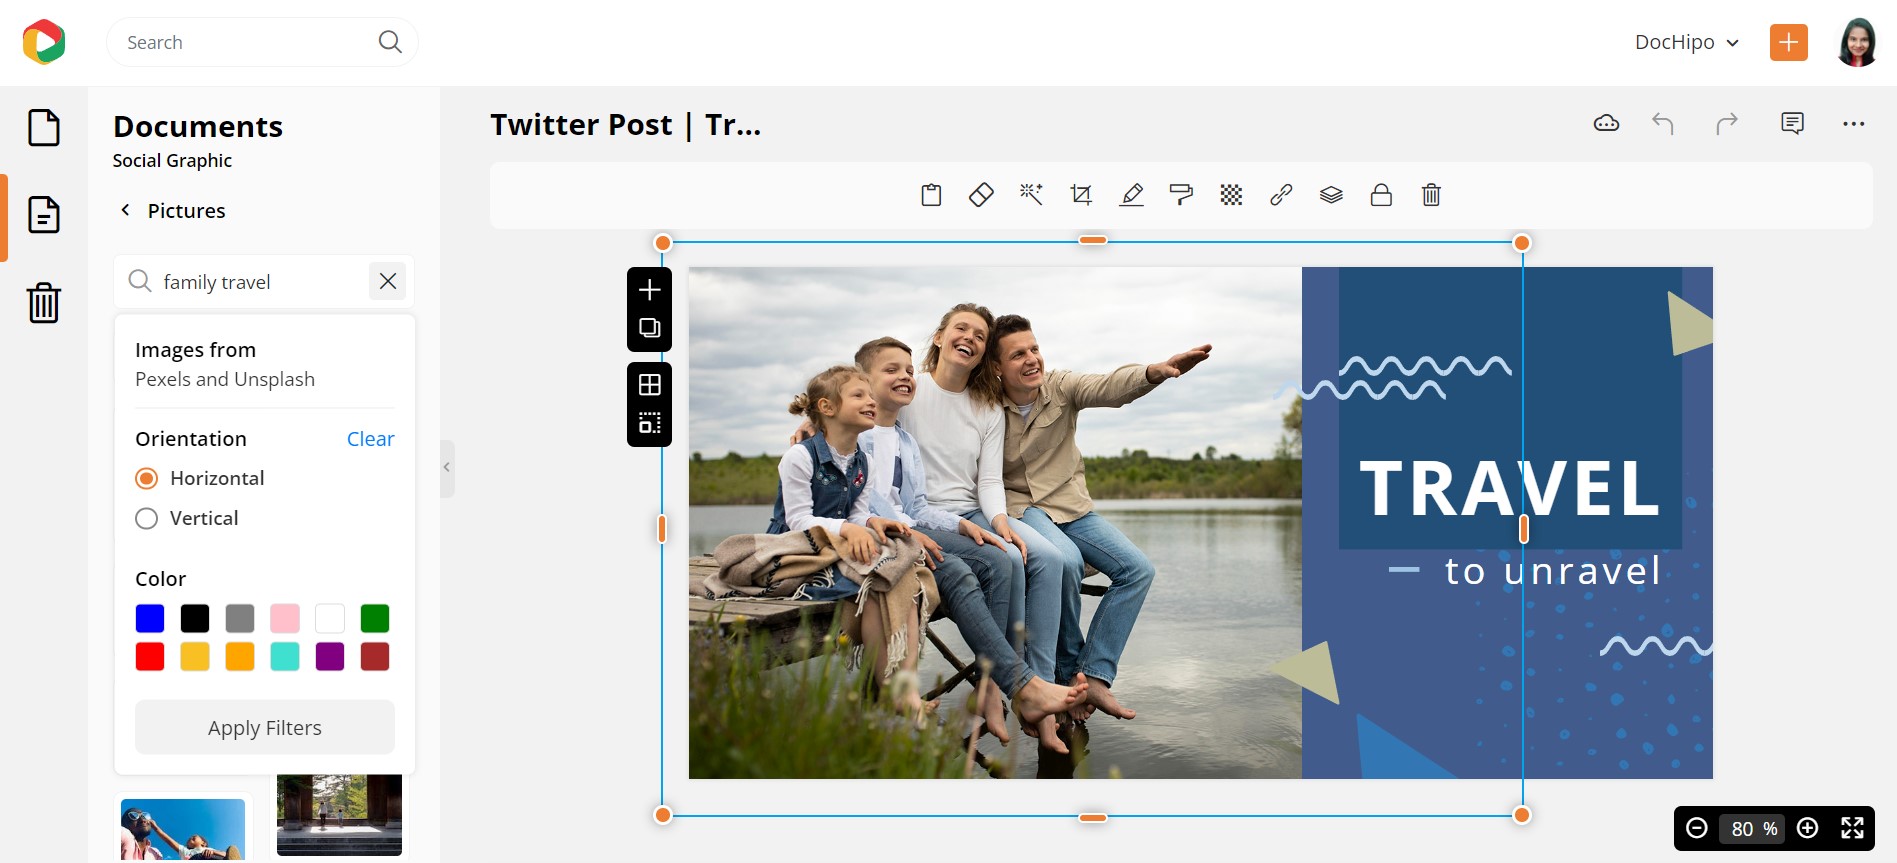 Apply Filters to Images from Stock Photo Libraries